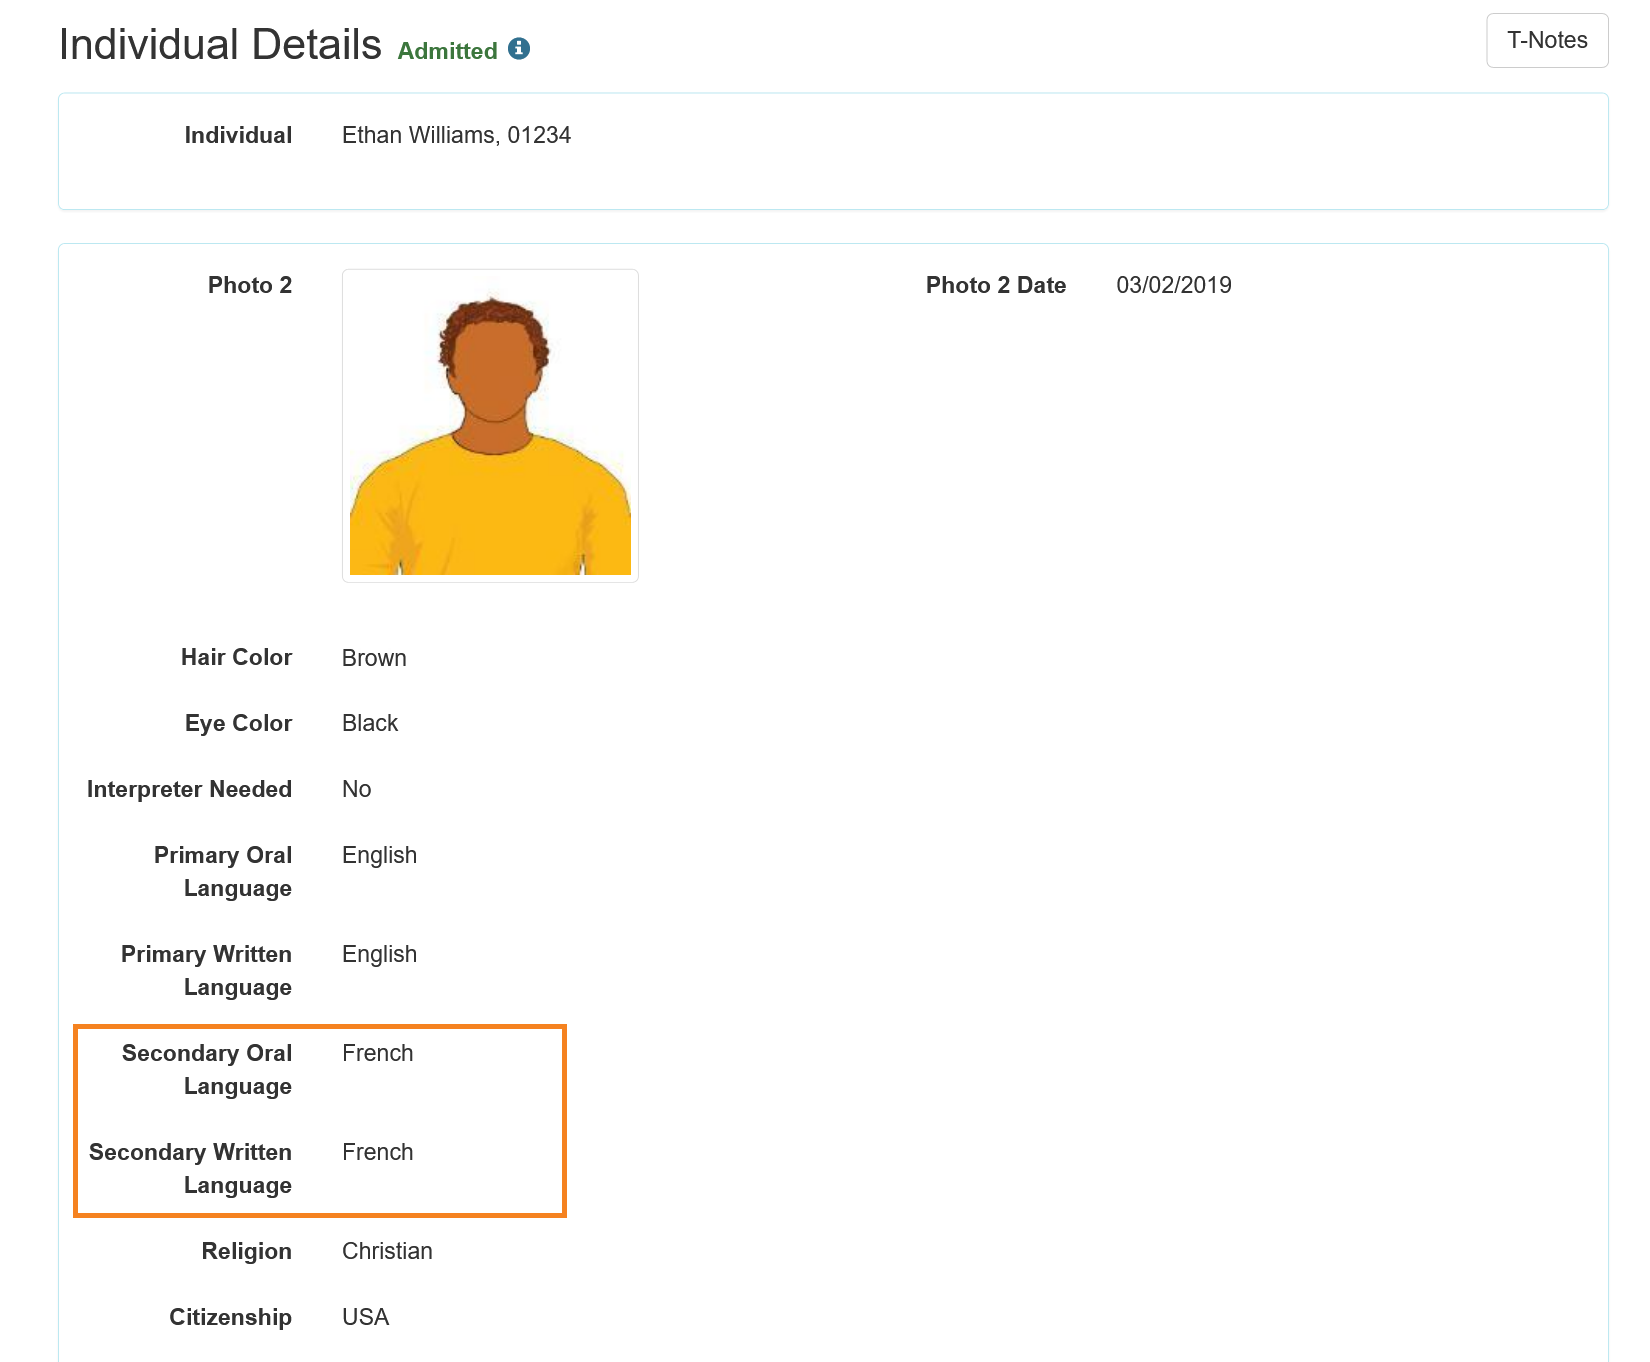 Screenshot of the Individual Details page highlighting the Secondary Oral Language and Secondary Written Language fields